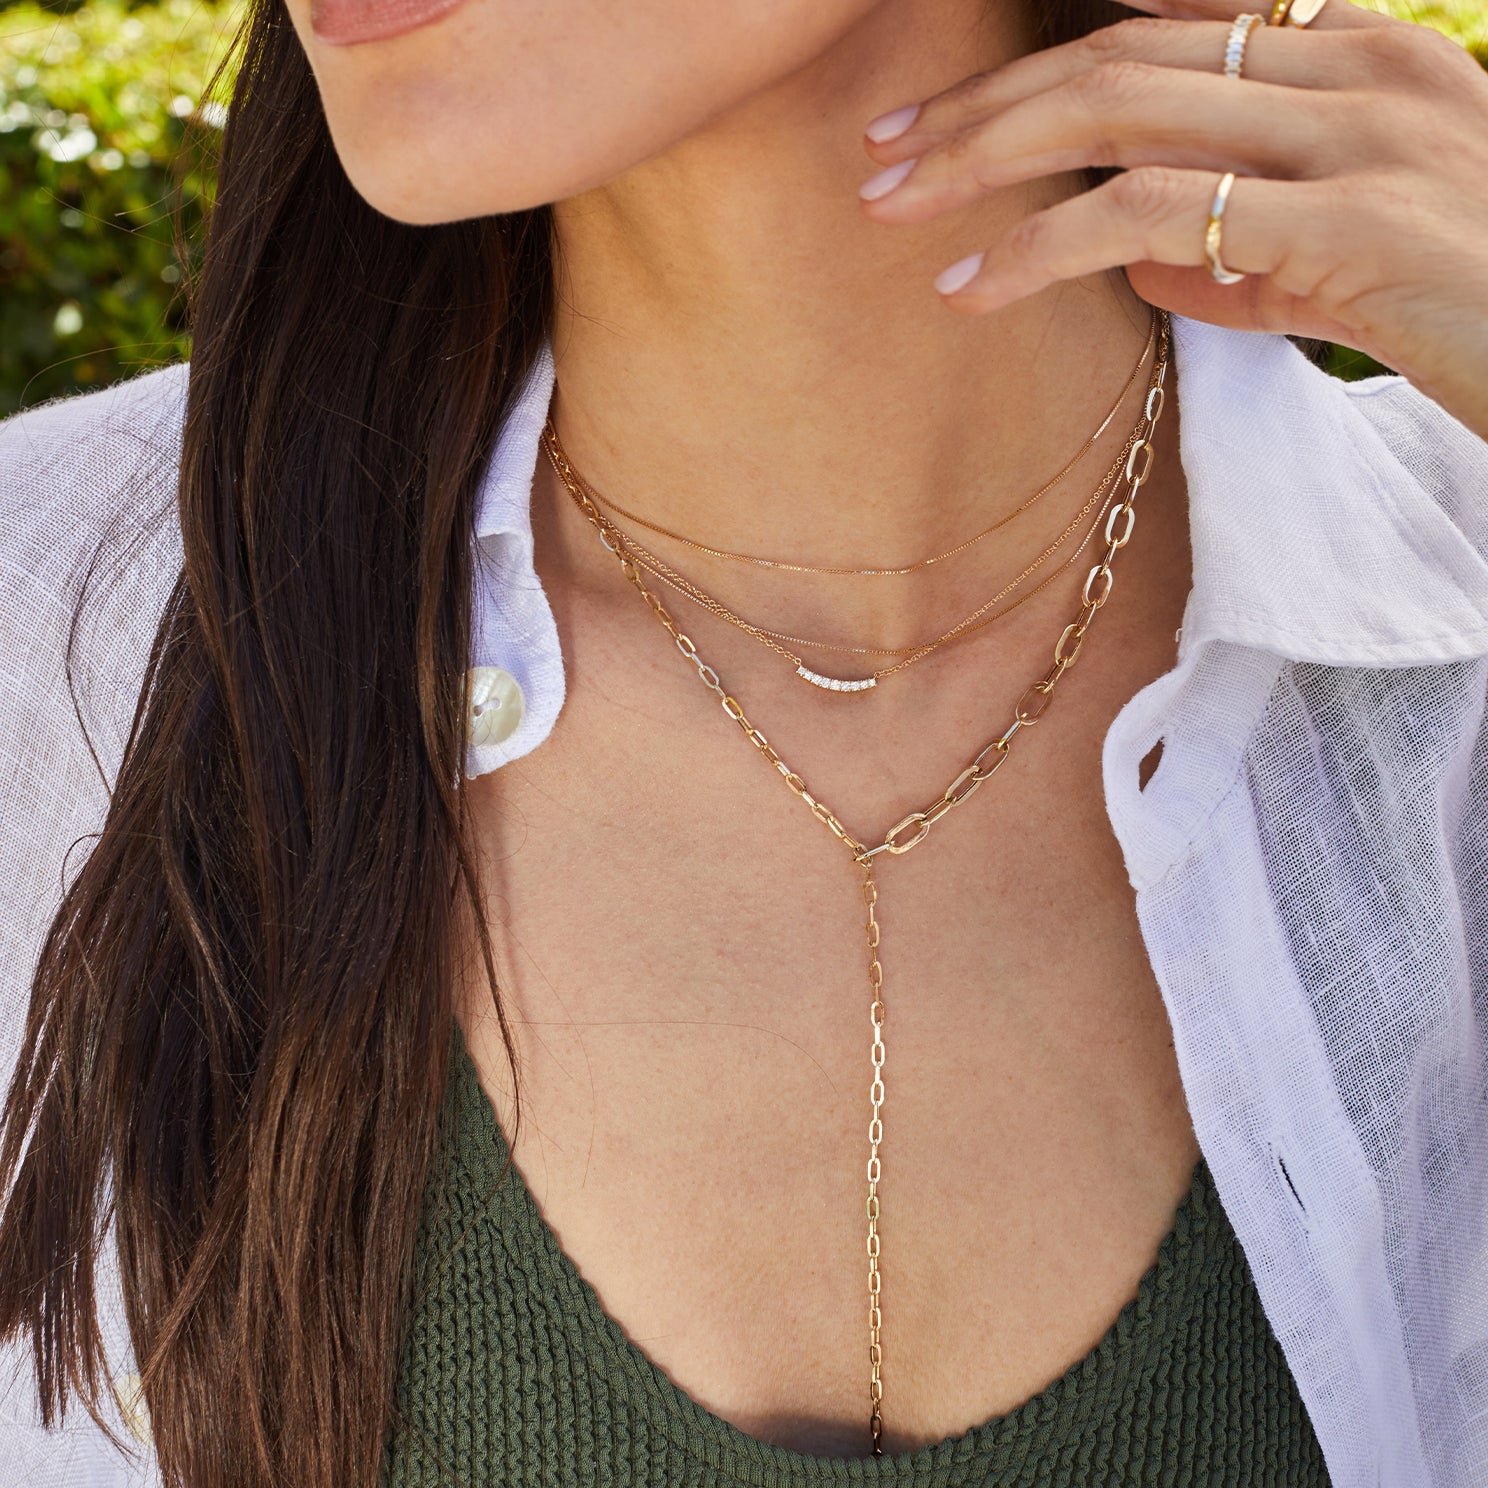 Graduated Chain Link Lariat Necklace in 14k yellow gold styled on neck of model with multiple gold necklaces